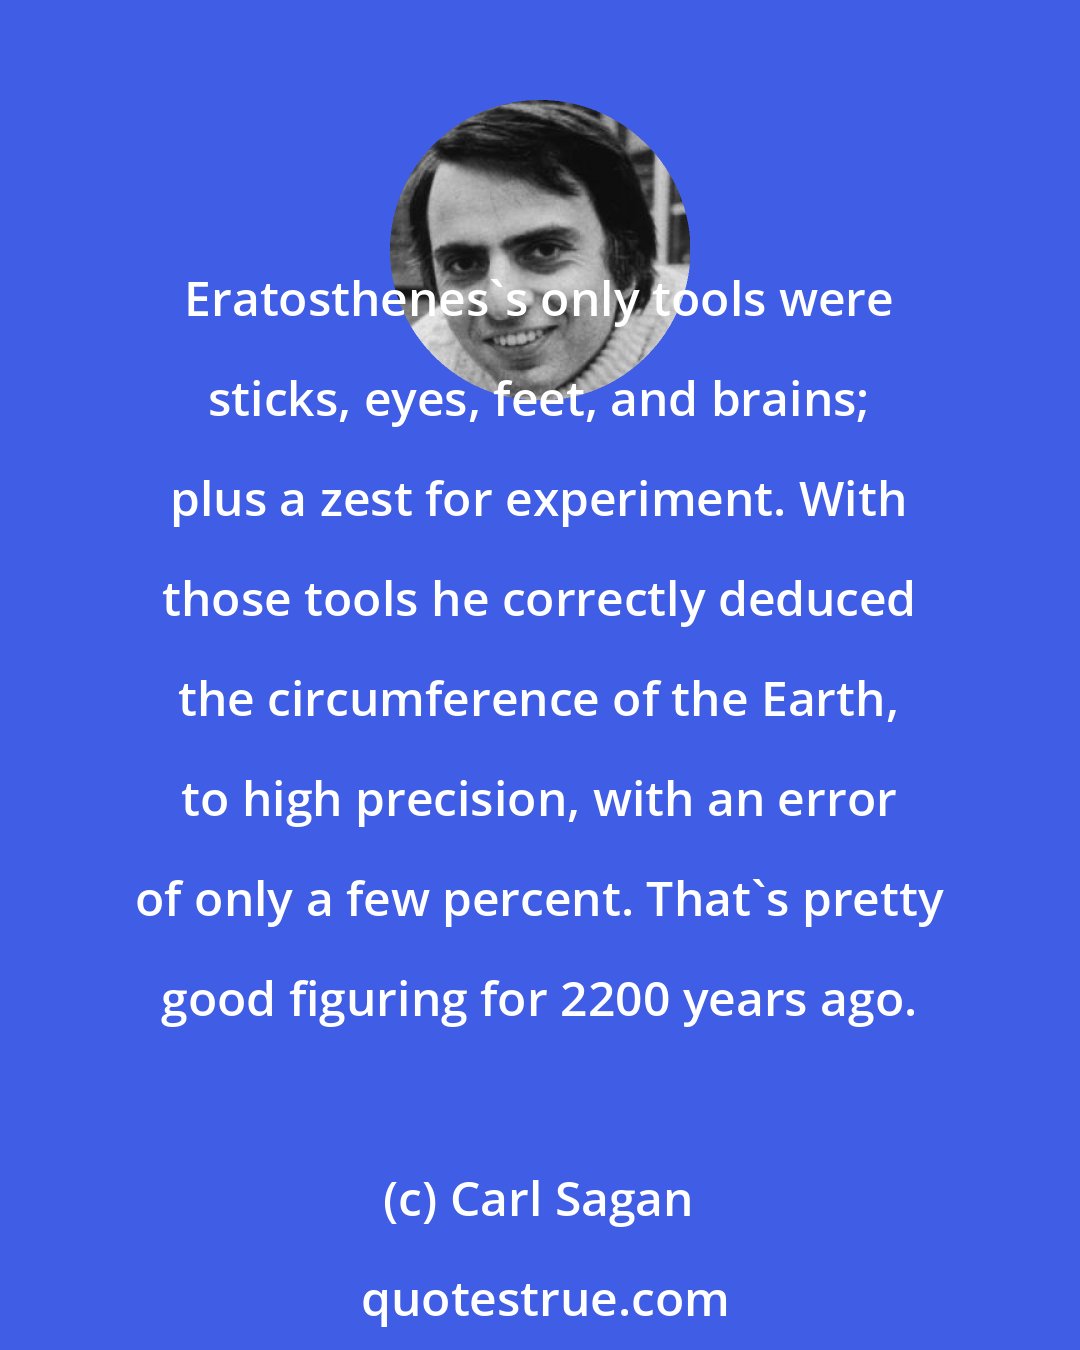 Carl Sagan: Eratosthenes's only tools were sticks, eyes, feet, and brains; plus a zest for experiment. With those tools he correctly deduced the circumference of the Earth, to high precision, with an error of only a few percent. That's pretty good figuring for 2200 years ago.